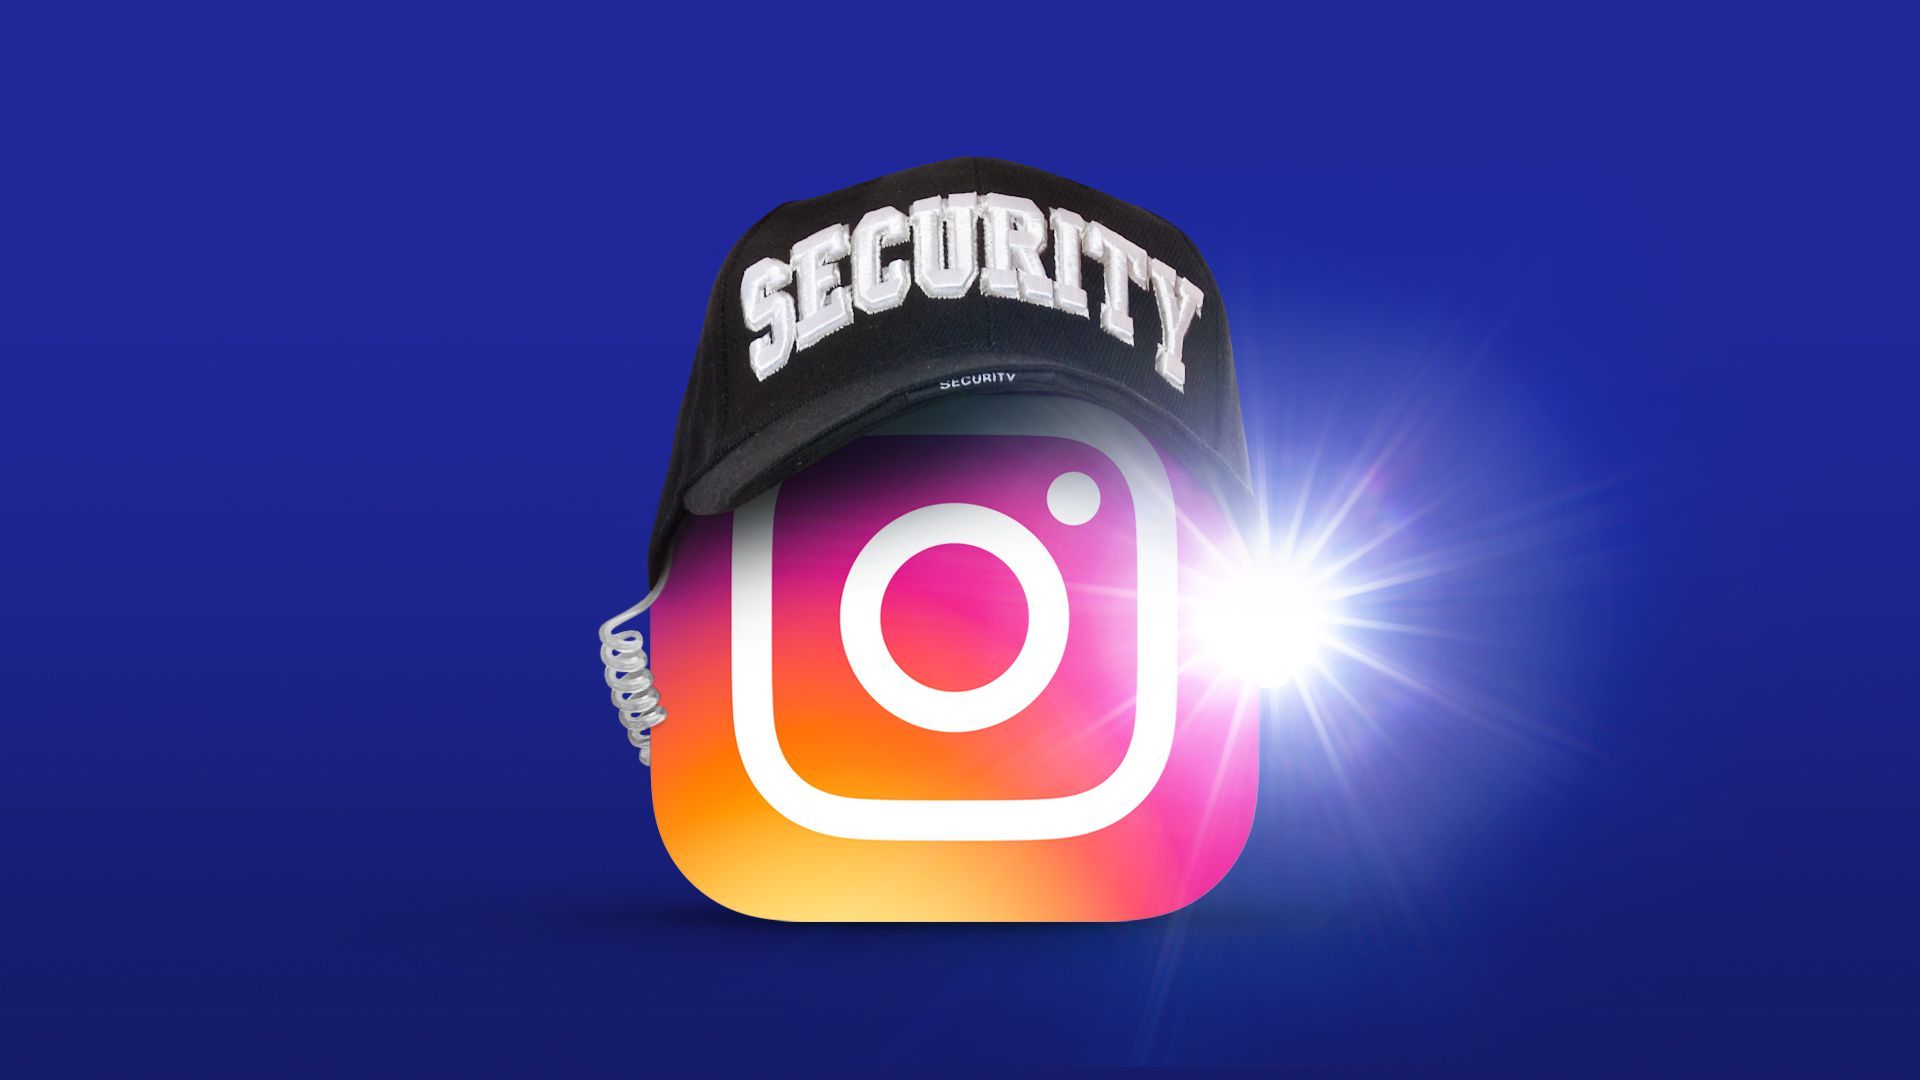 Illustration of the Instagram logo with a security hat and earpiece shining a flashlight forward